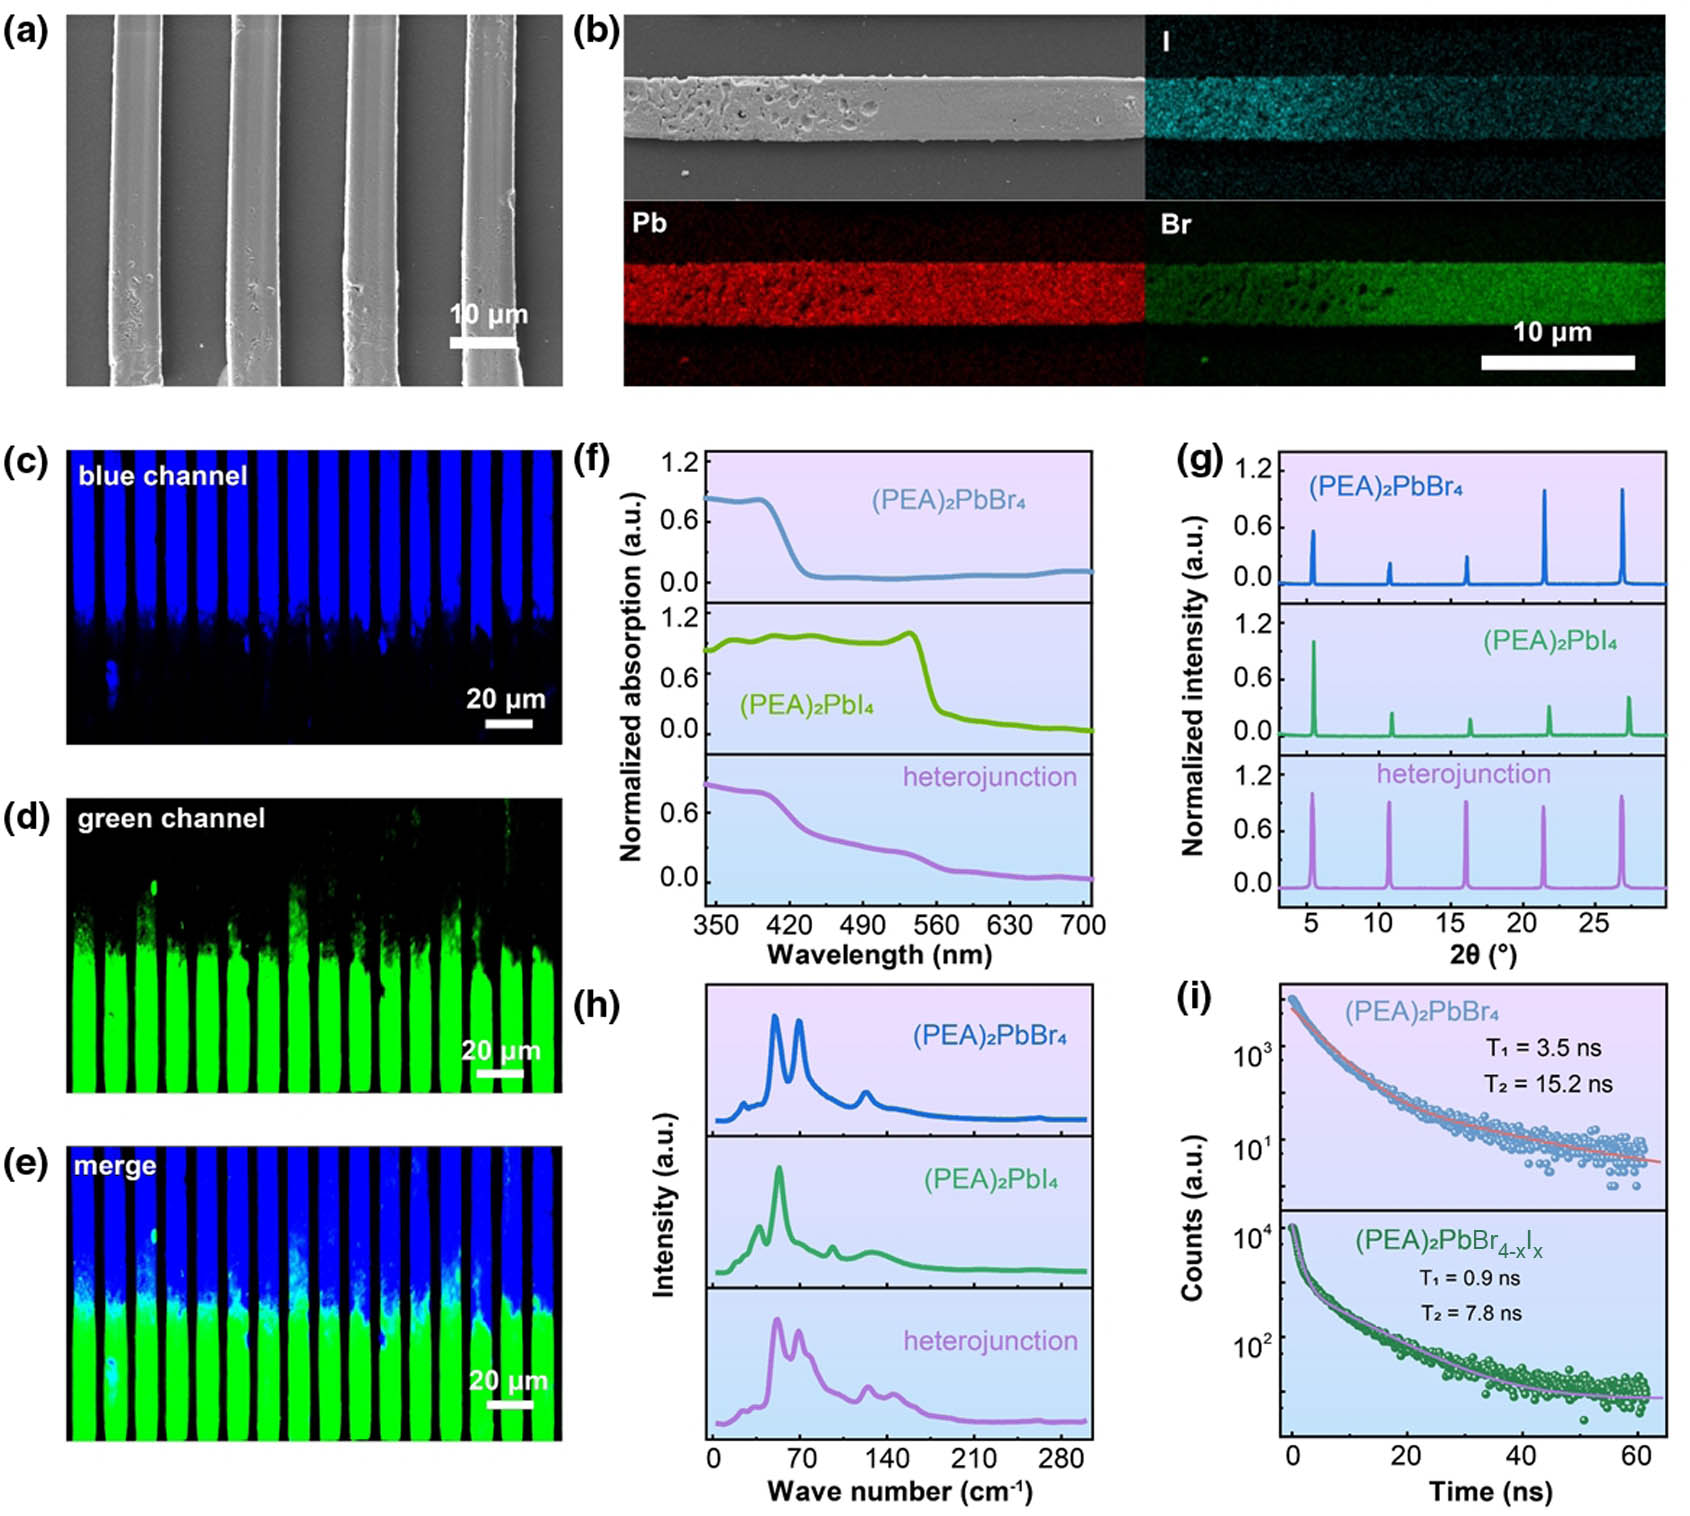 (a) SEM image of the lateral heterojunction array; (b) I, Pb, Br element distribution of lateral heterojunction; (c)–(e) fluorescence microscope photos of lateral heterojunction array; (f) absorption spectrum, (g) XRD pattern, and (h) Raman spectrum of (PEA)2PbBr4−xIx, (PEA)2PbBr4, and (PEA)2PbI4; (i) typical time-resolved photoluminescence curves of (PEA)2PbBr4 and (PEA)2PbBr4−xIx.